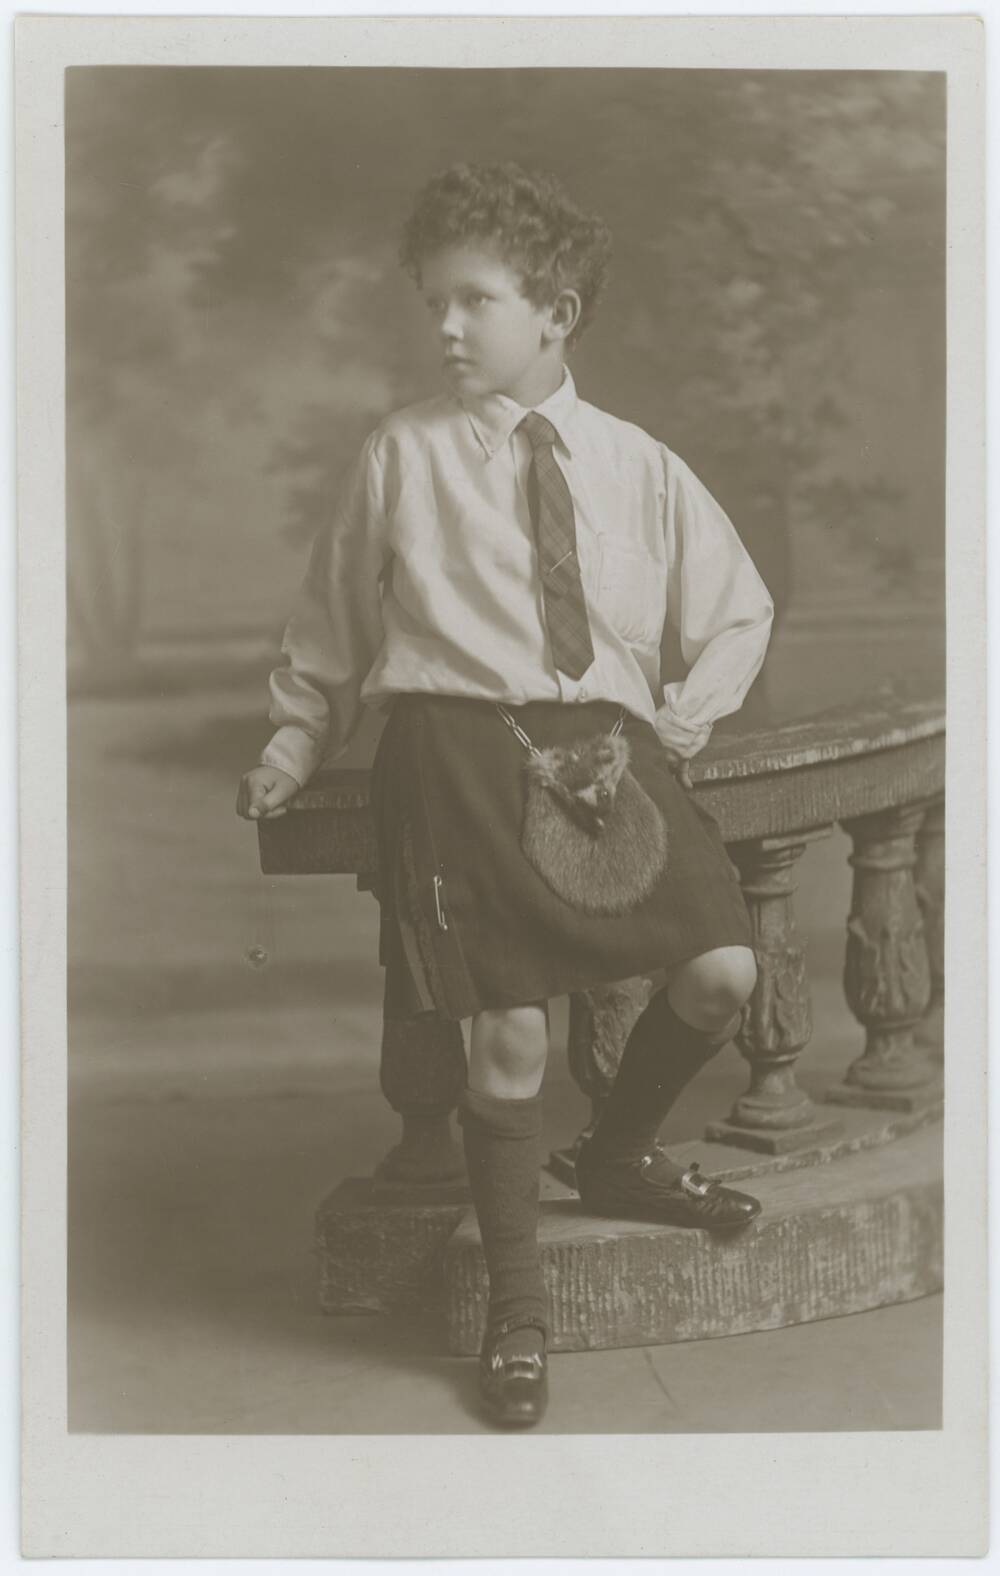 A full-length formal black and white photograph of a young boy. He stands by a banister and looks away to the left. He is wearing a white shirt, tartan tie, kilt, sporran and woollen knee-high socks.